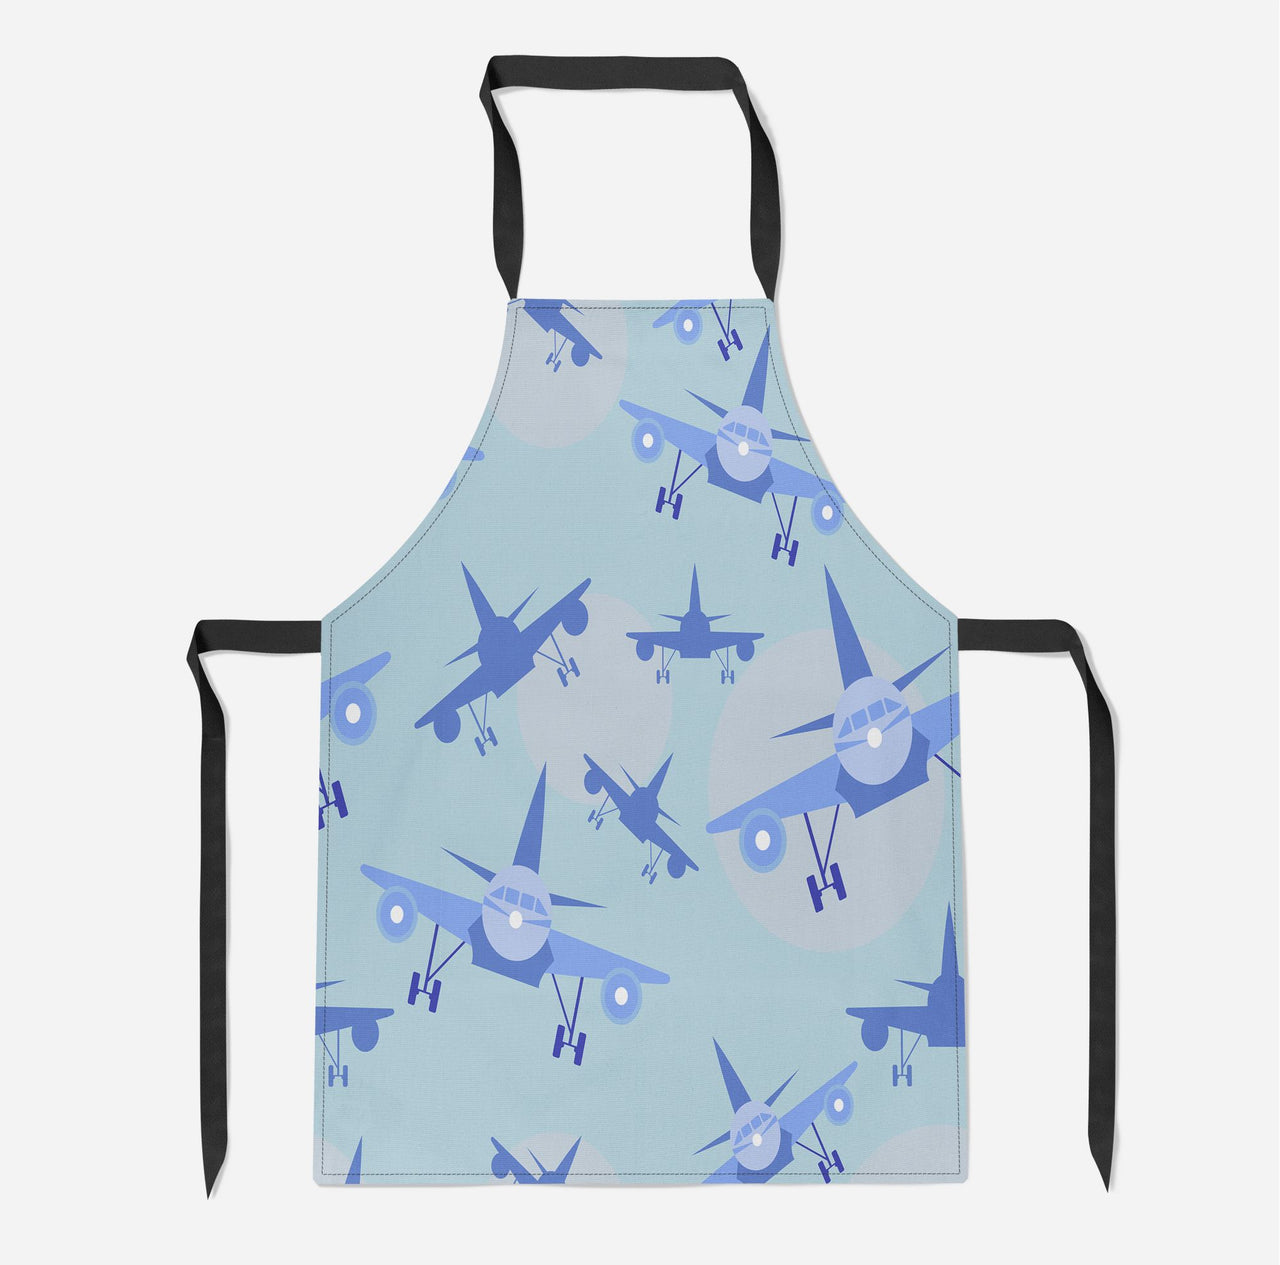 Super Funny Airplanes Designed Kitchen Aprons